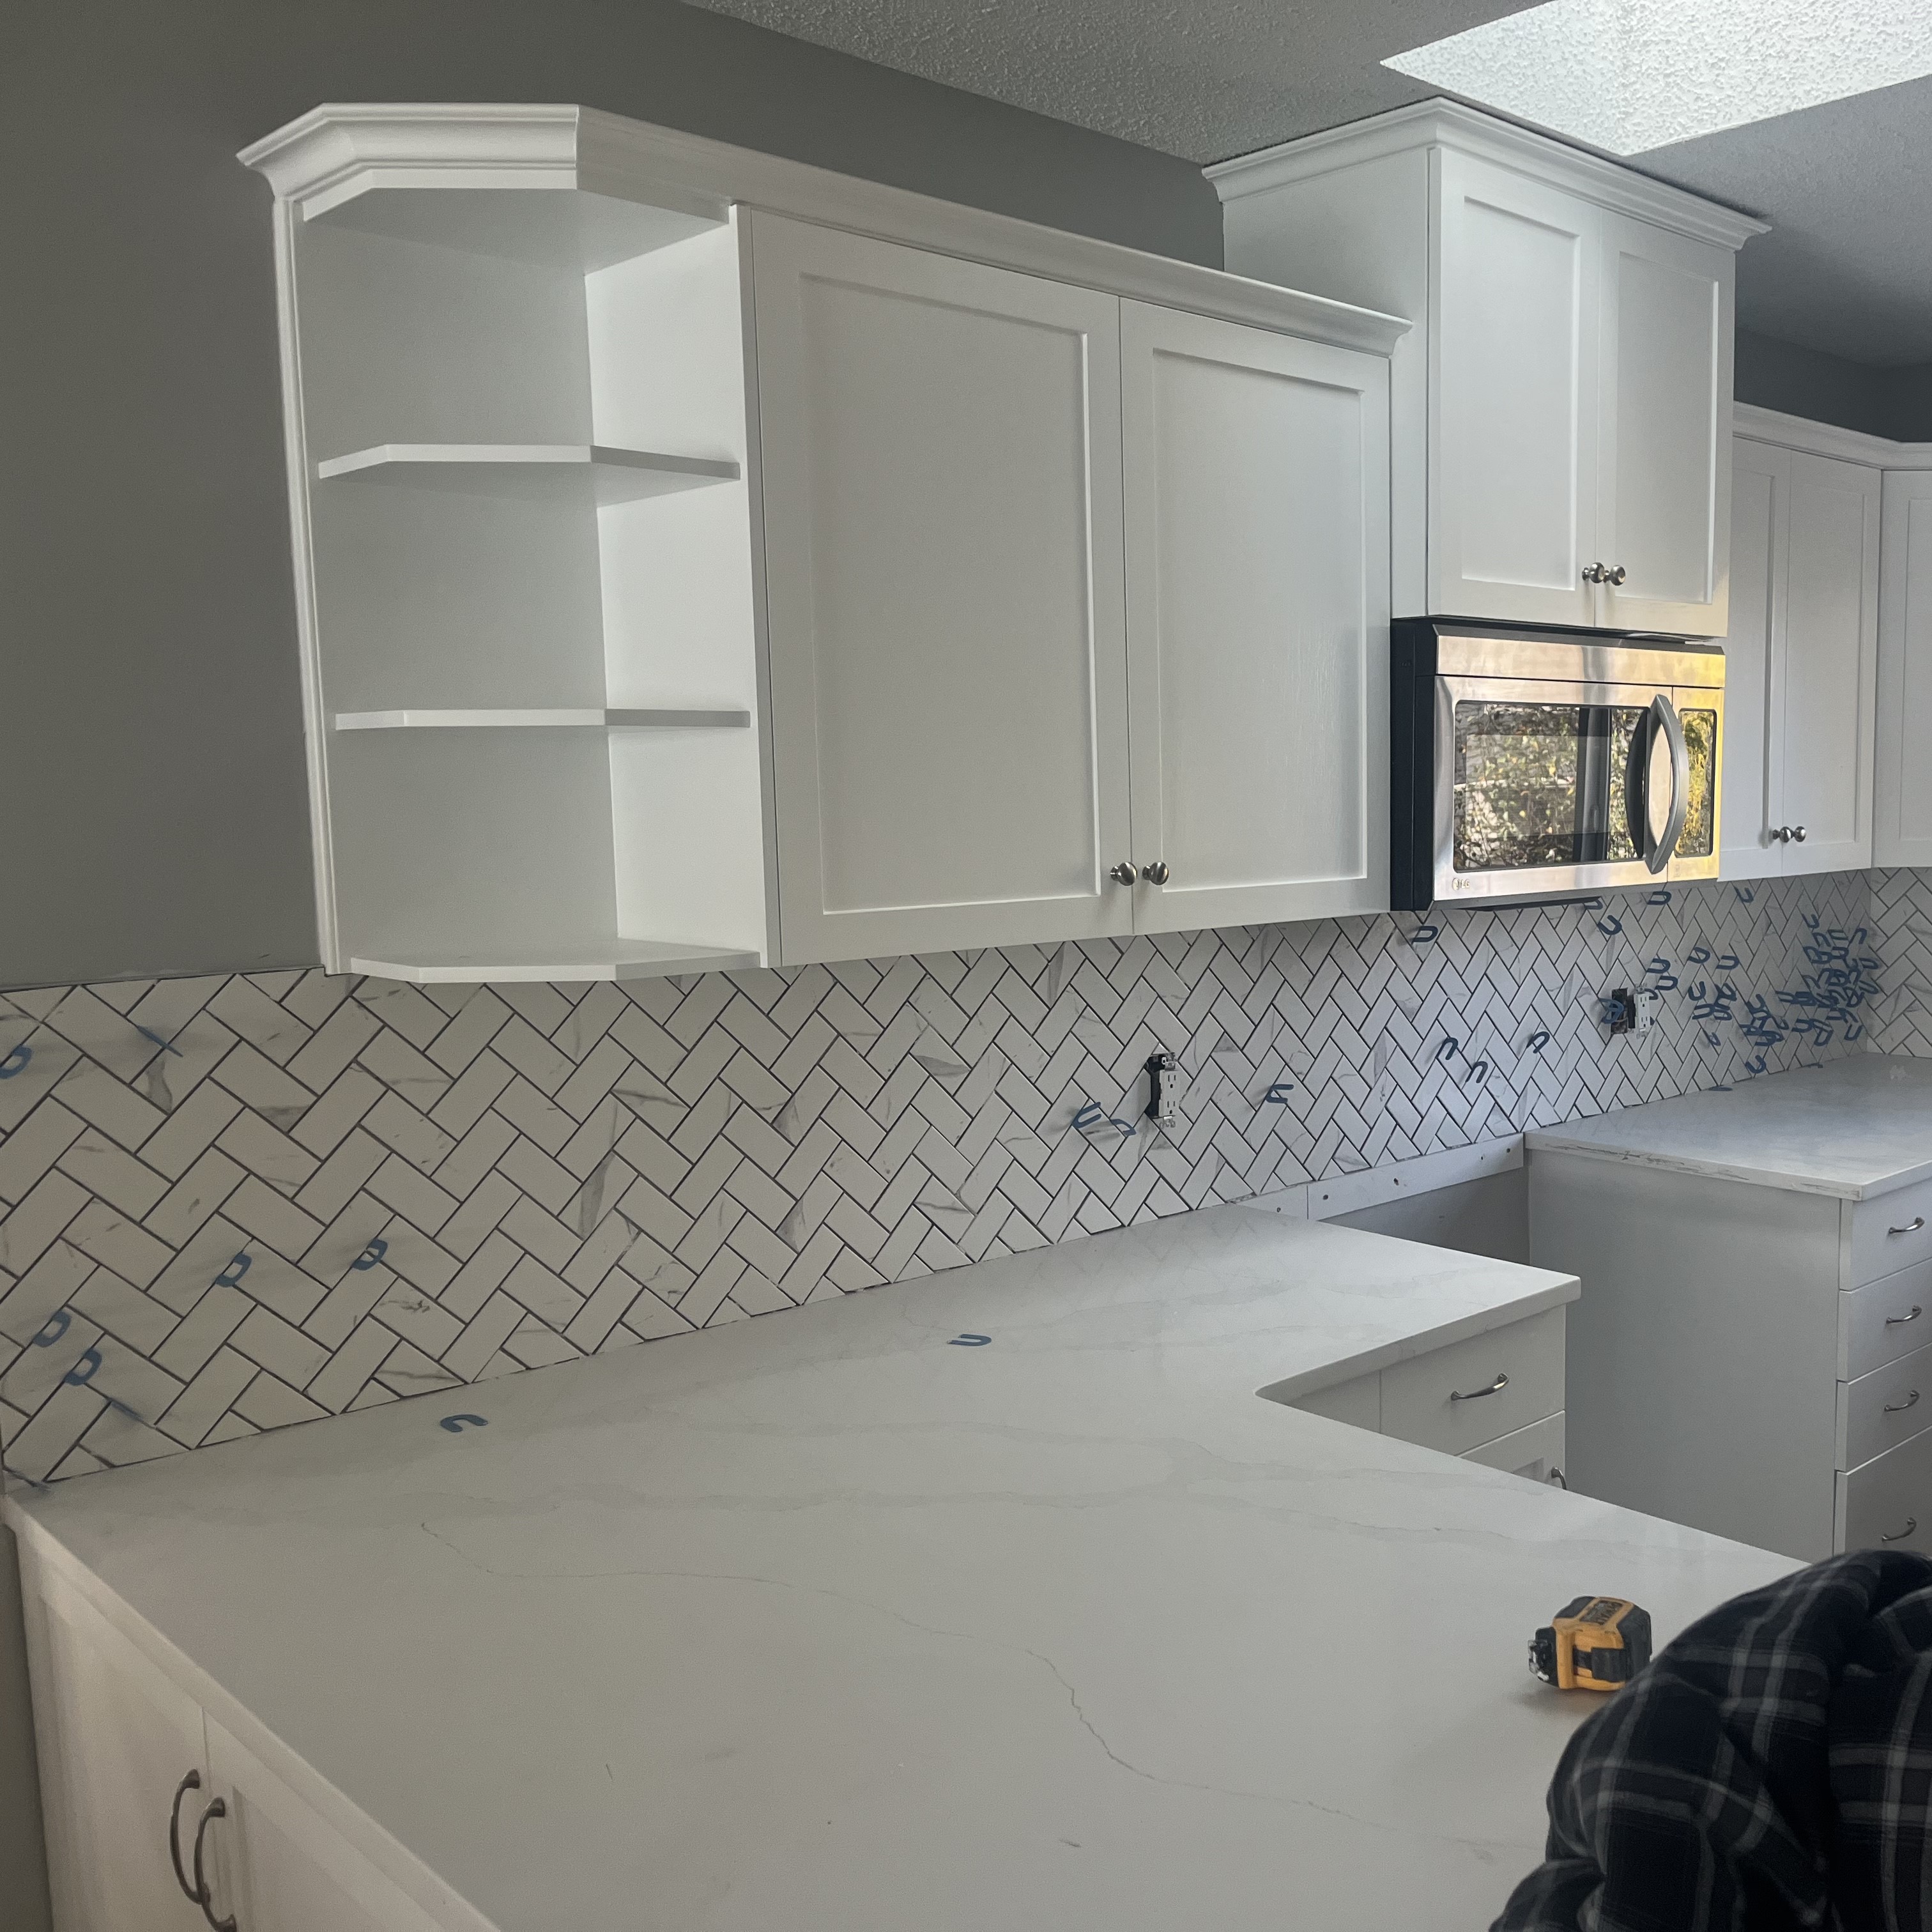 Best paint for kitchen cabinets in Calgary